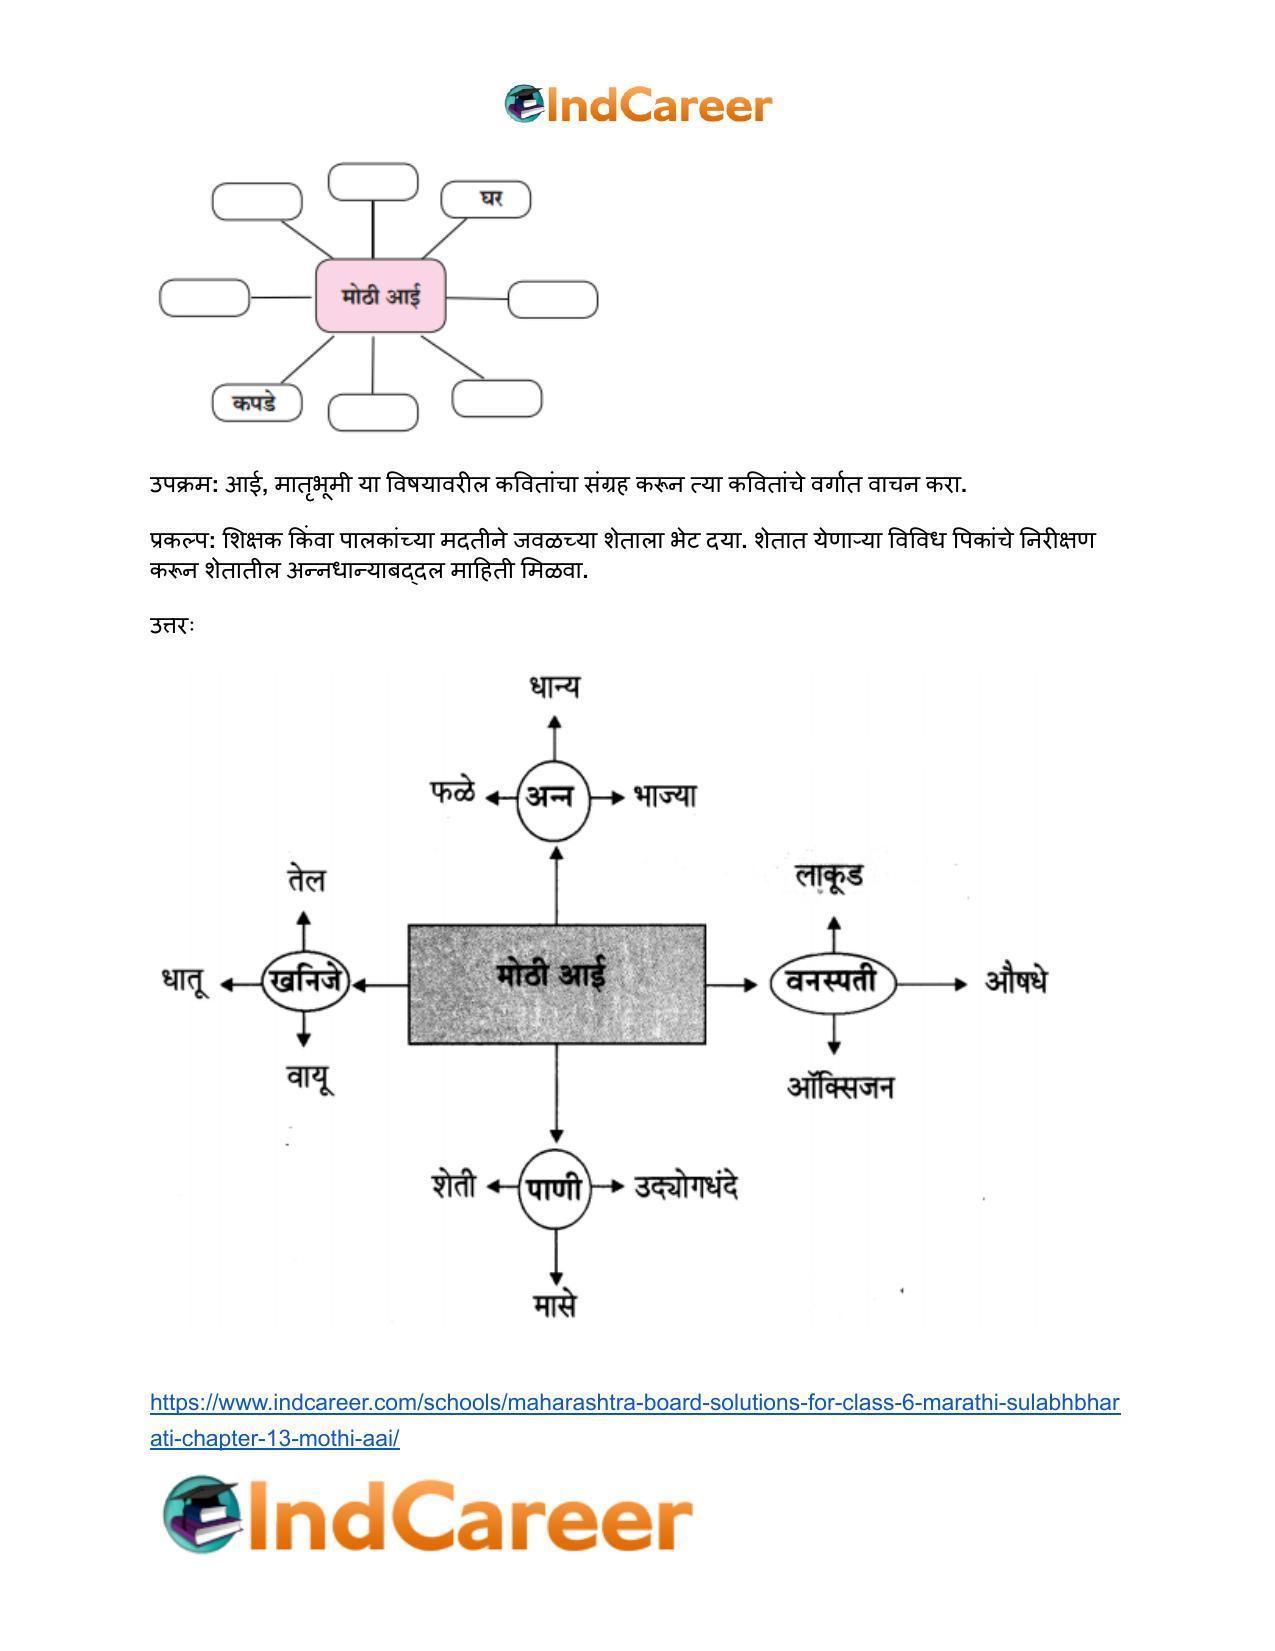 Maharashtra Board Solutions for Class 6- Marathi Sulabhbharati: Chapter 13- मोठी आई - Page 11